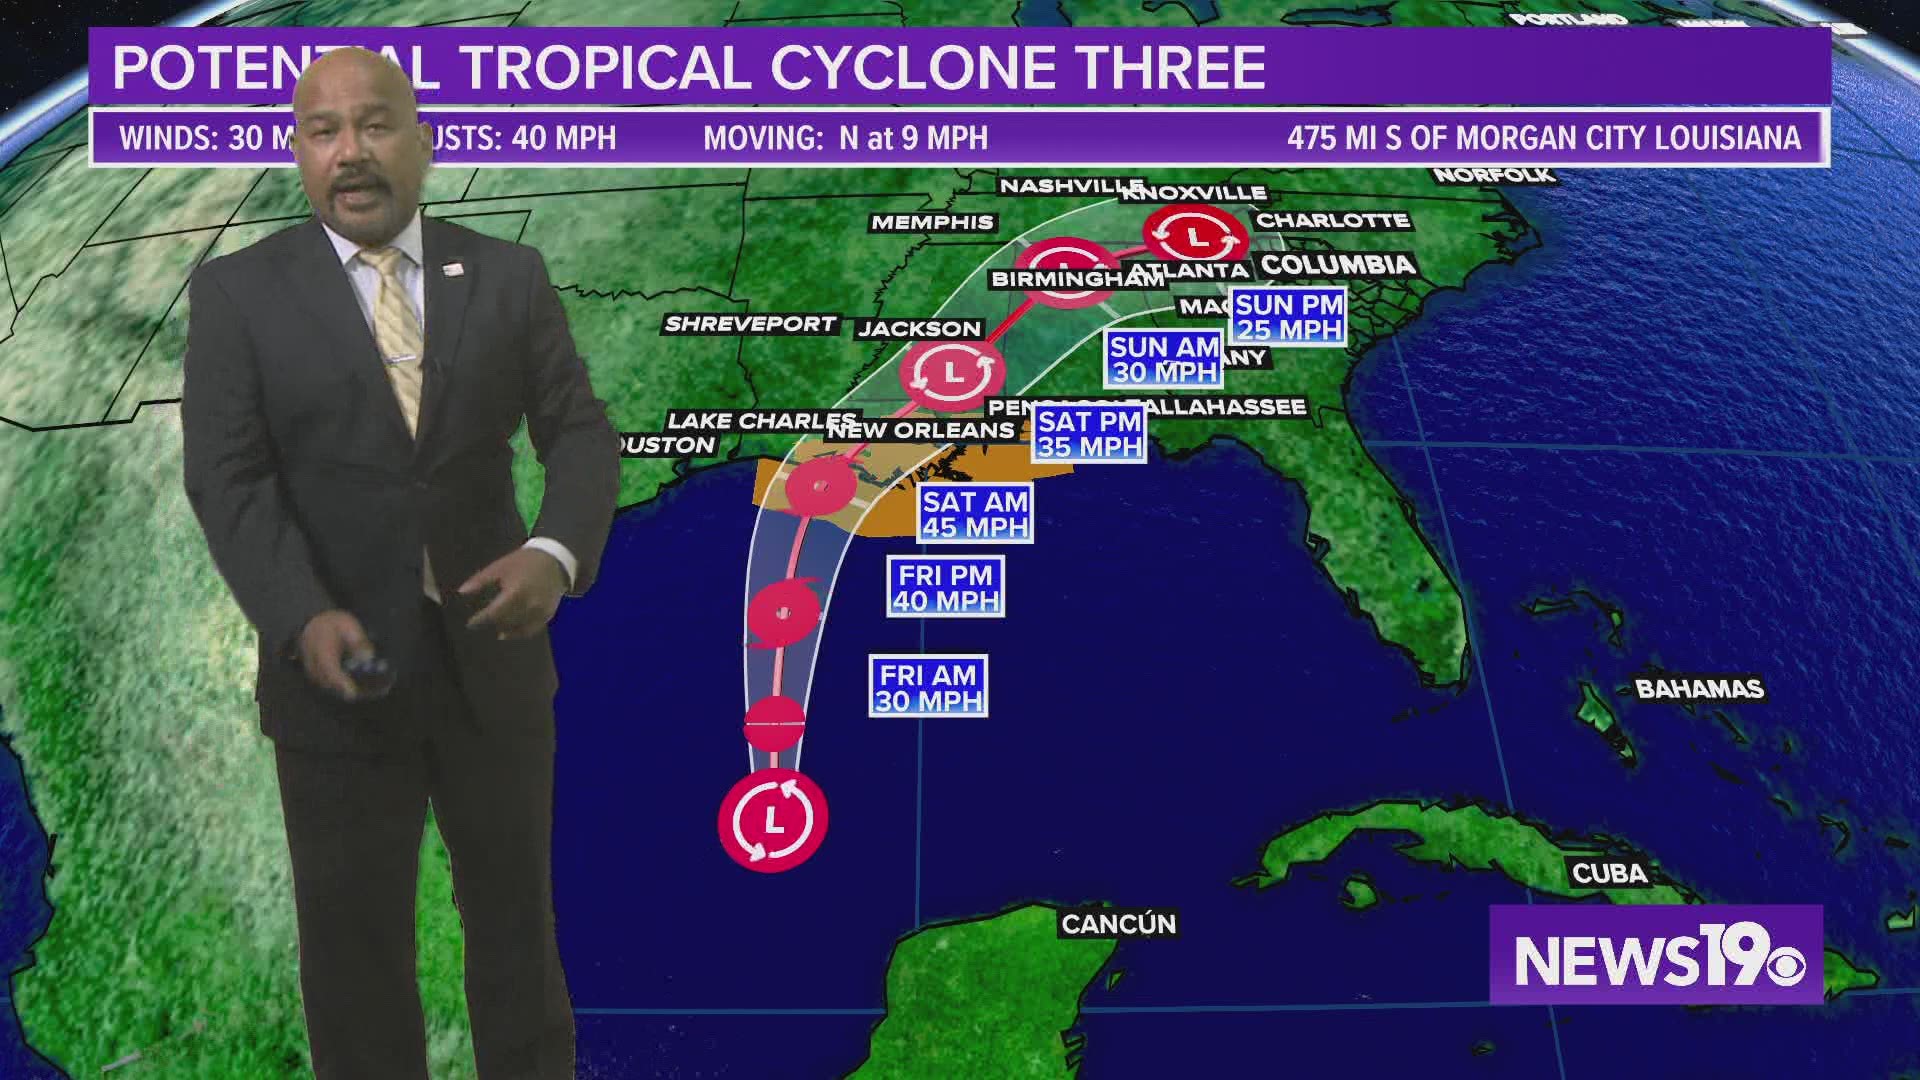 Potential Tropical Cyclone Three, which could become Claudette, is expected to bring flooding conditions to the Gulf Coast and possibly to much of the Southeast.